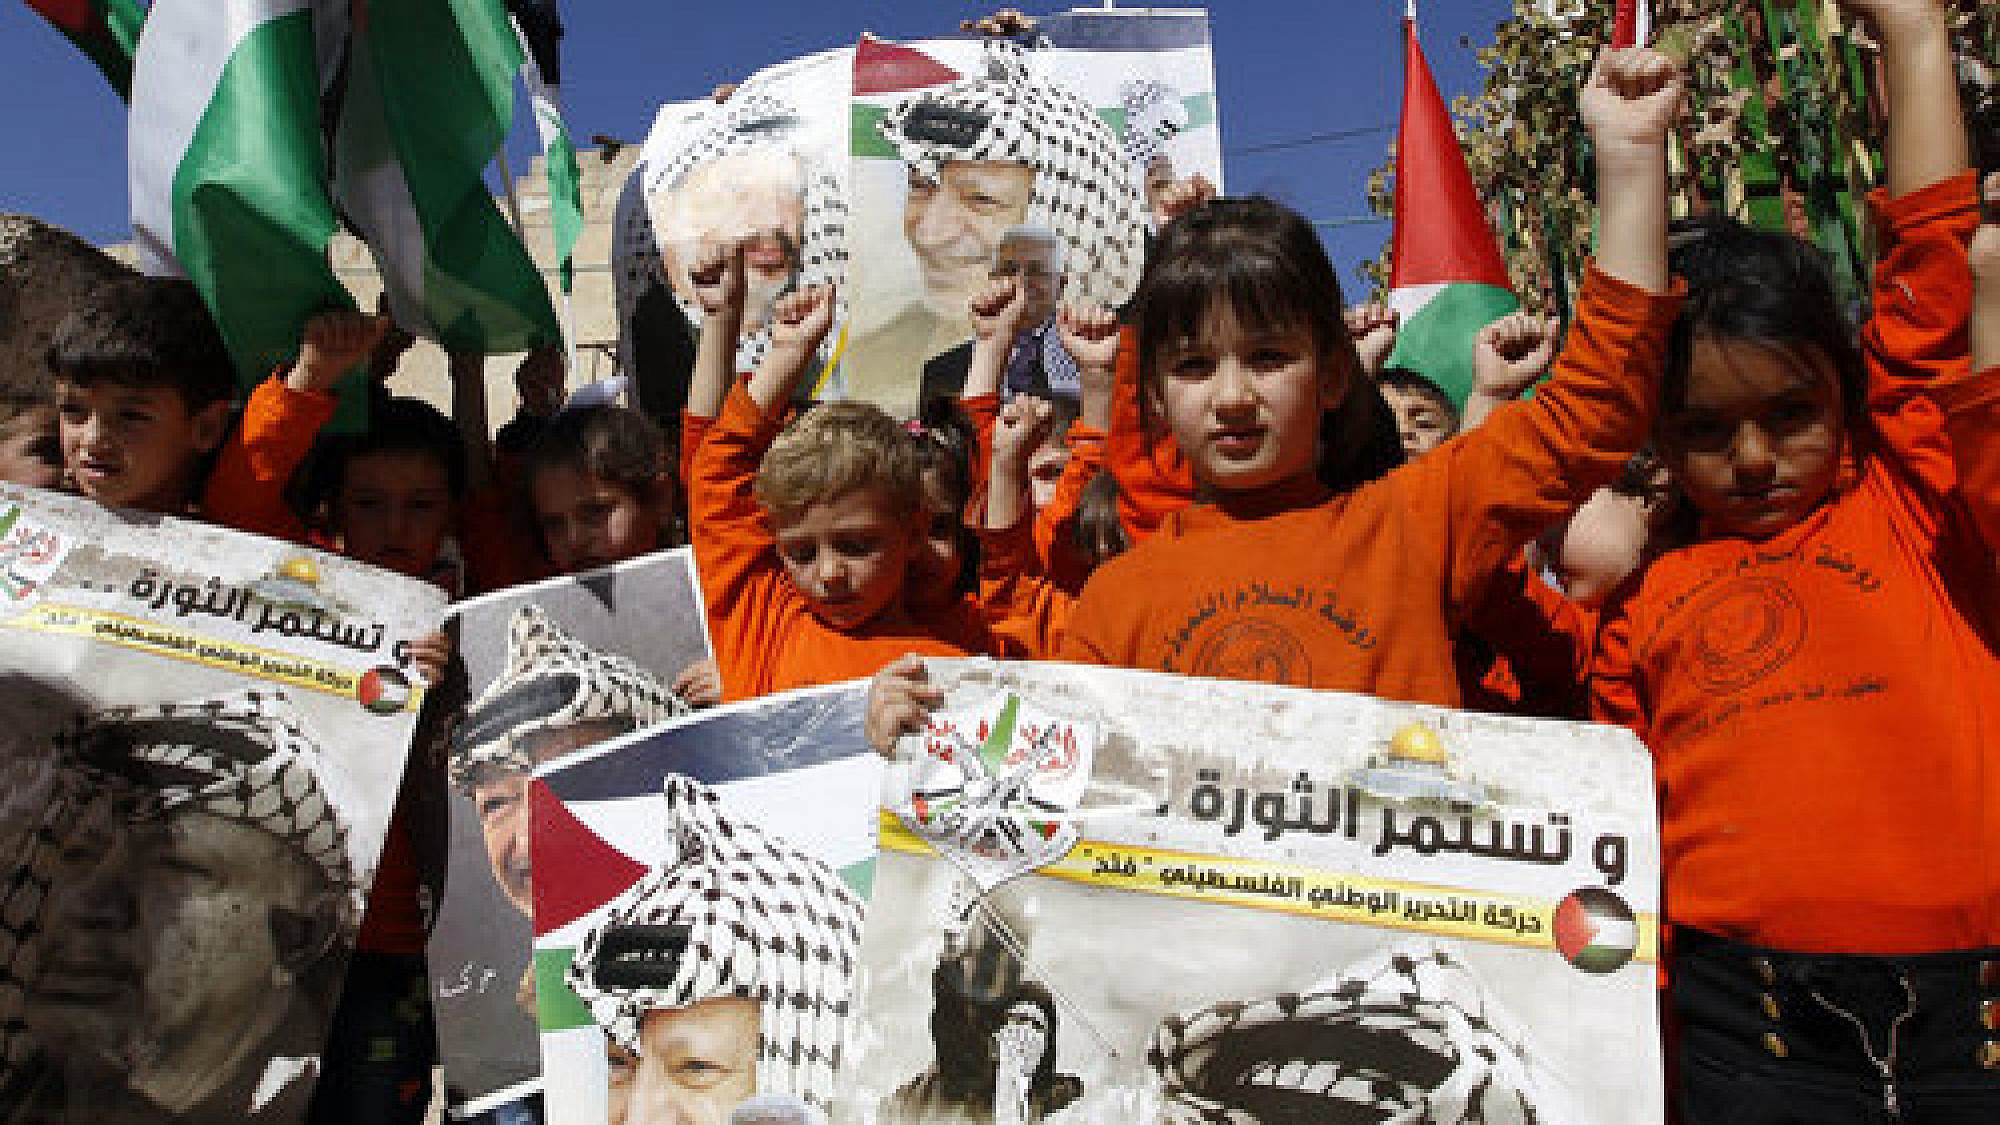 Palestinian children hold posters with the picture of former Palestinian head Yasser Arafat and current Palestinian Authority leader Mahmoud Abbas during a rally in Hebron marking the 12th anniversary of Arafat’s death Nov. 10, 2016. Credit: Wisam Hashlamoun/Flash90.